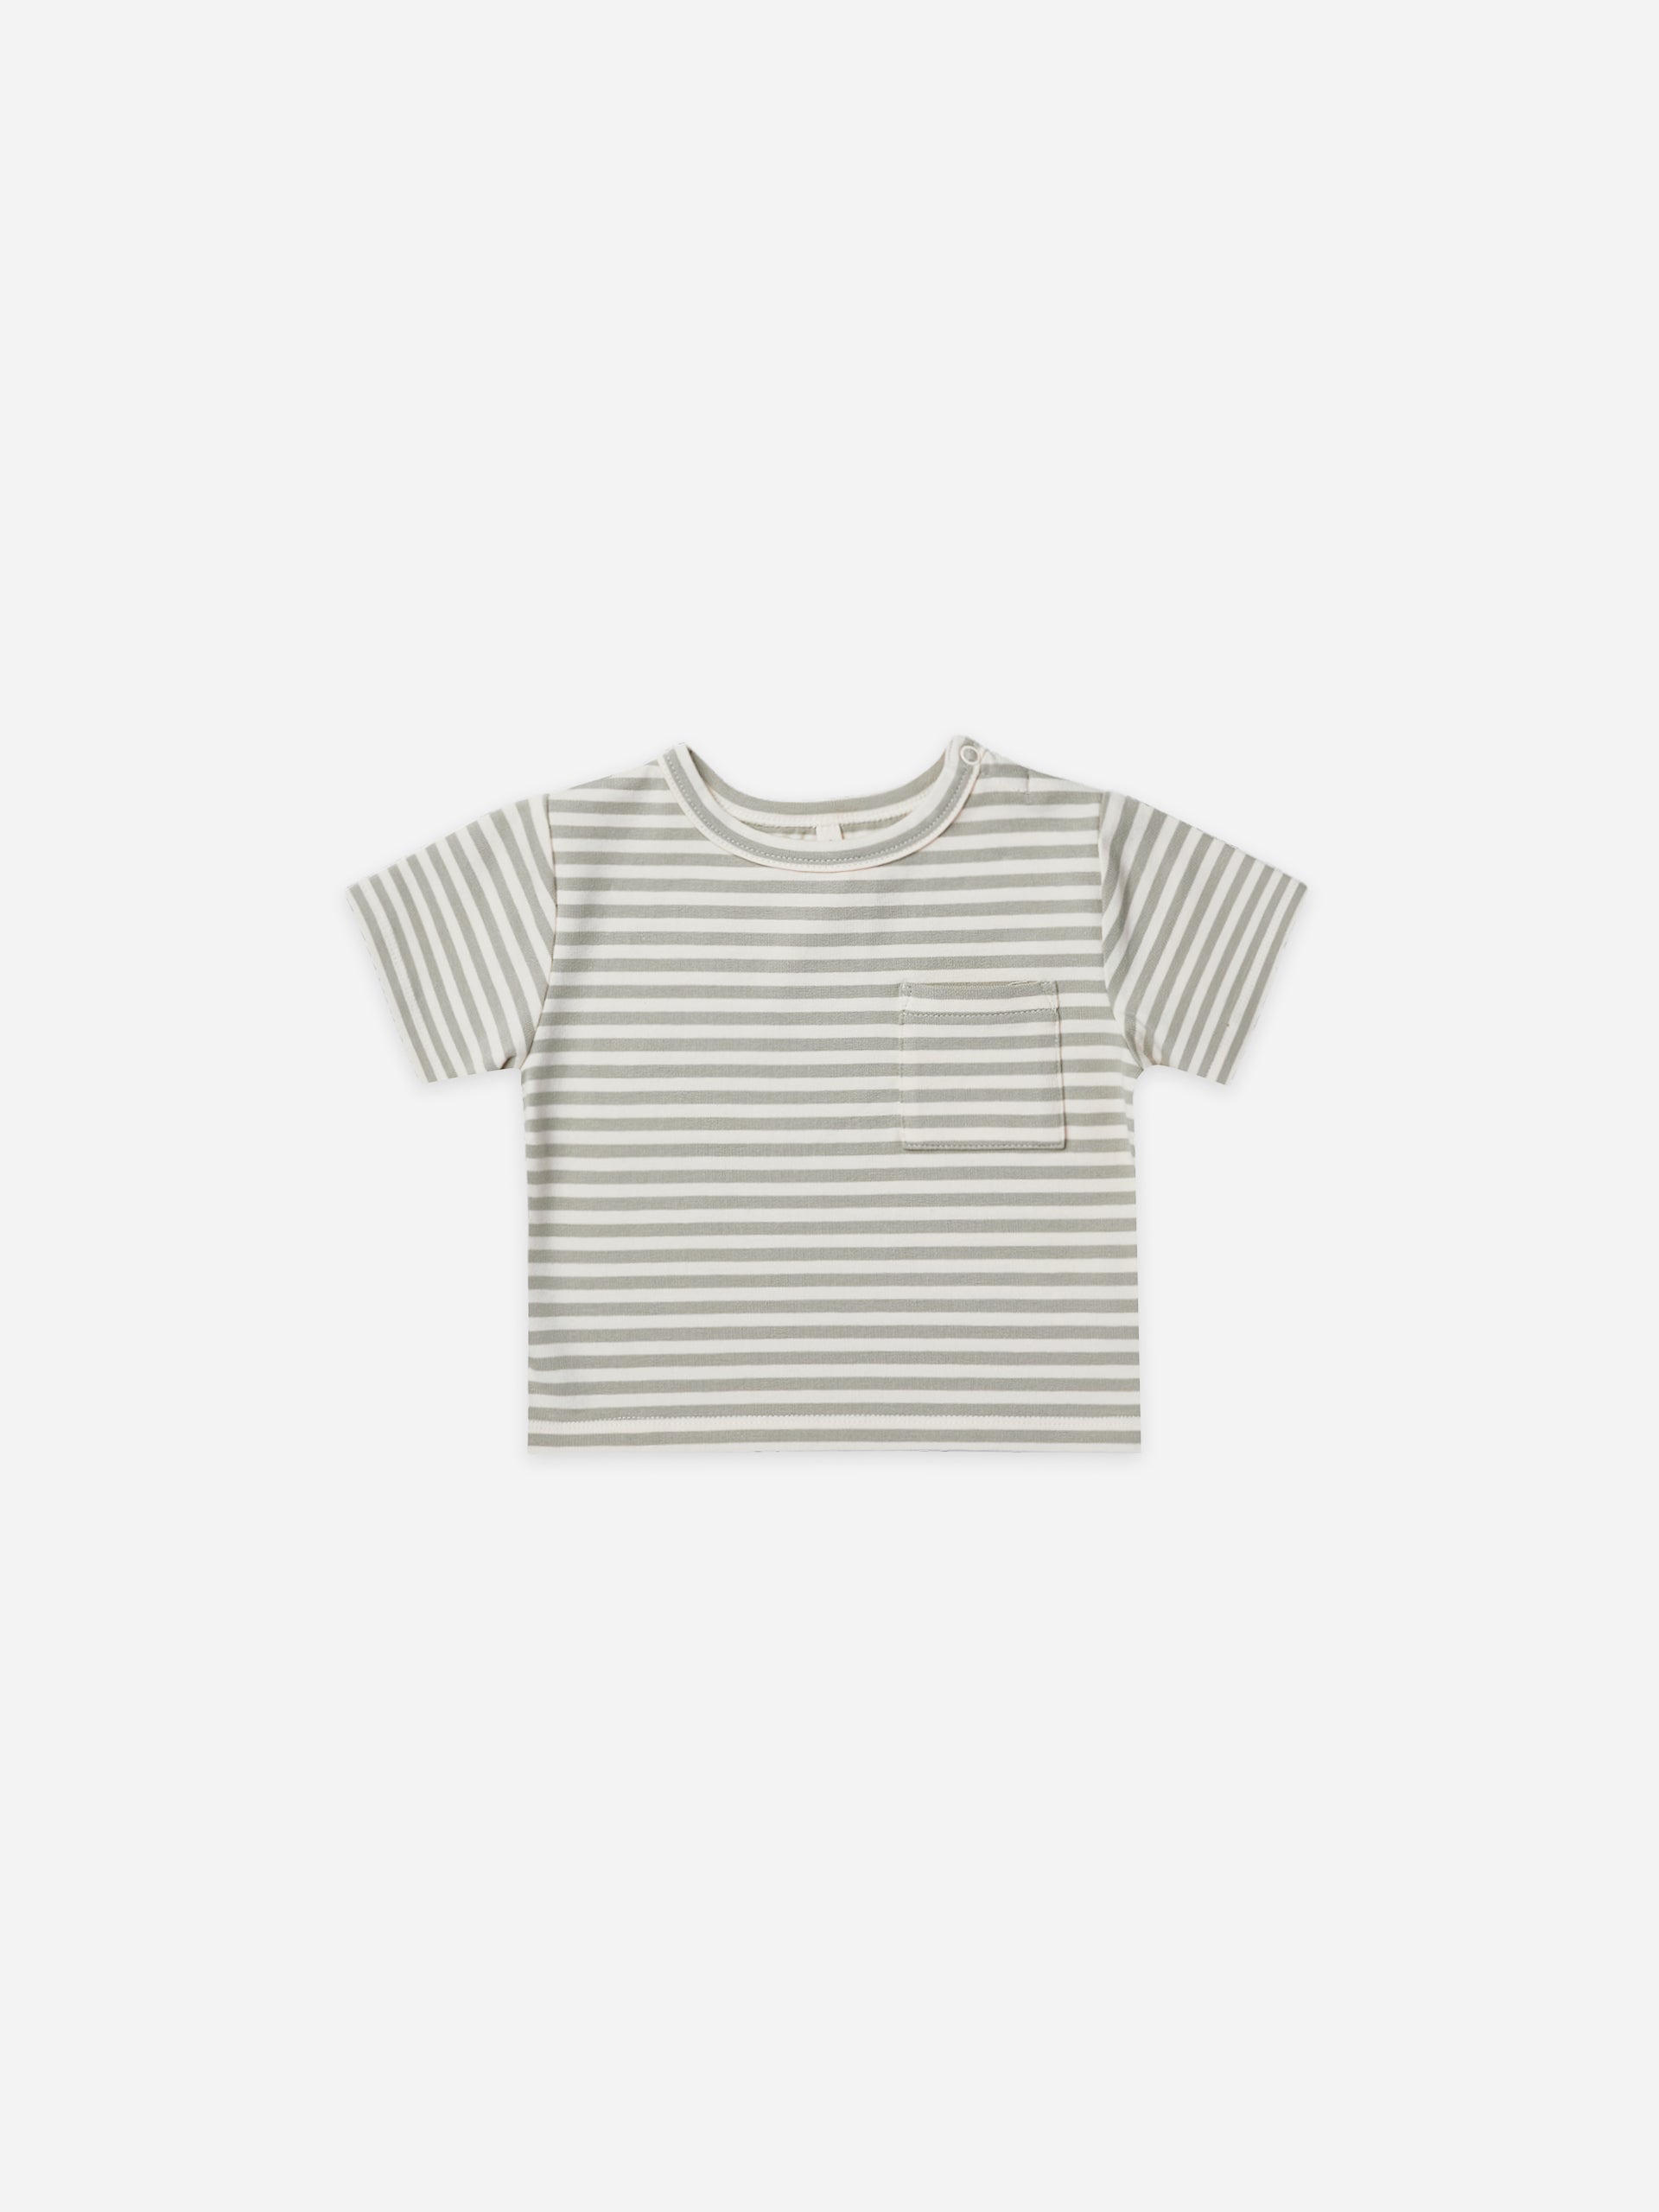 boxy pocket tee | pistachio stripe - Quincy Mae | Baby Basics | Baby Clothing | Organic Baby Clothes | Modern Baby Boy Clothes |